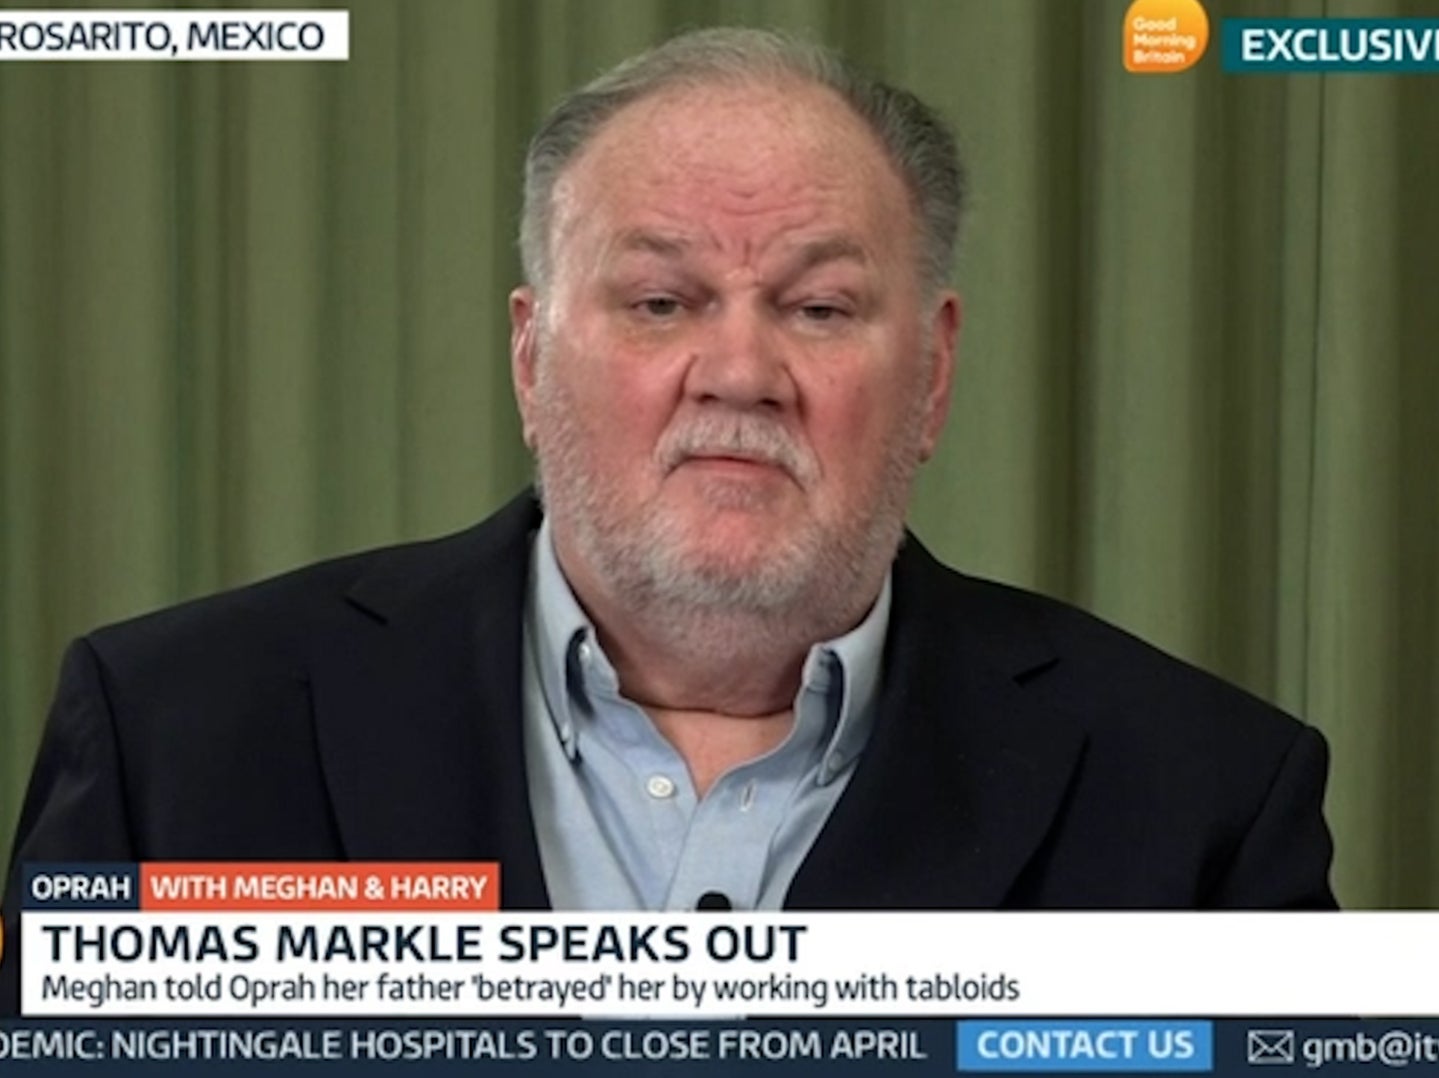 Thomas Markle has begged Harry and Meghan to let him finally meet his grandchildren.